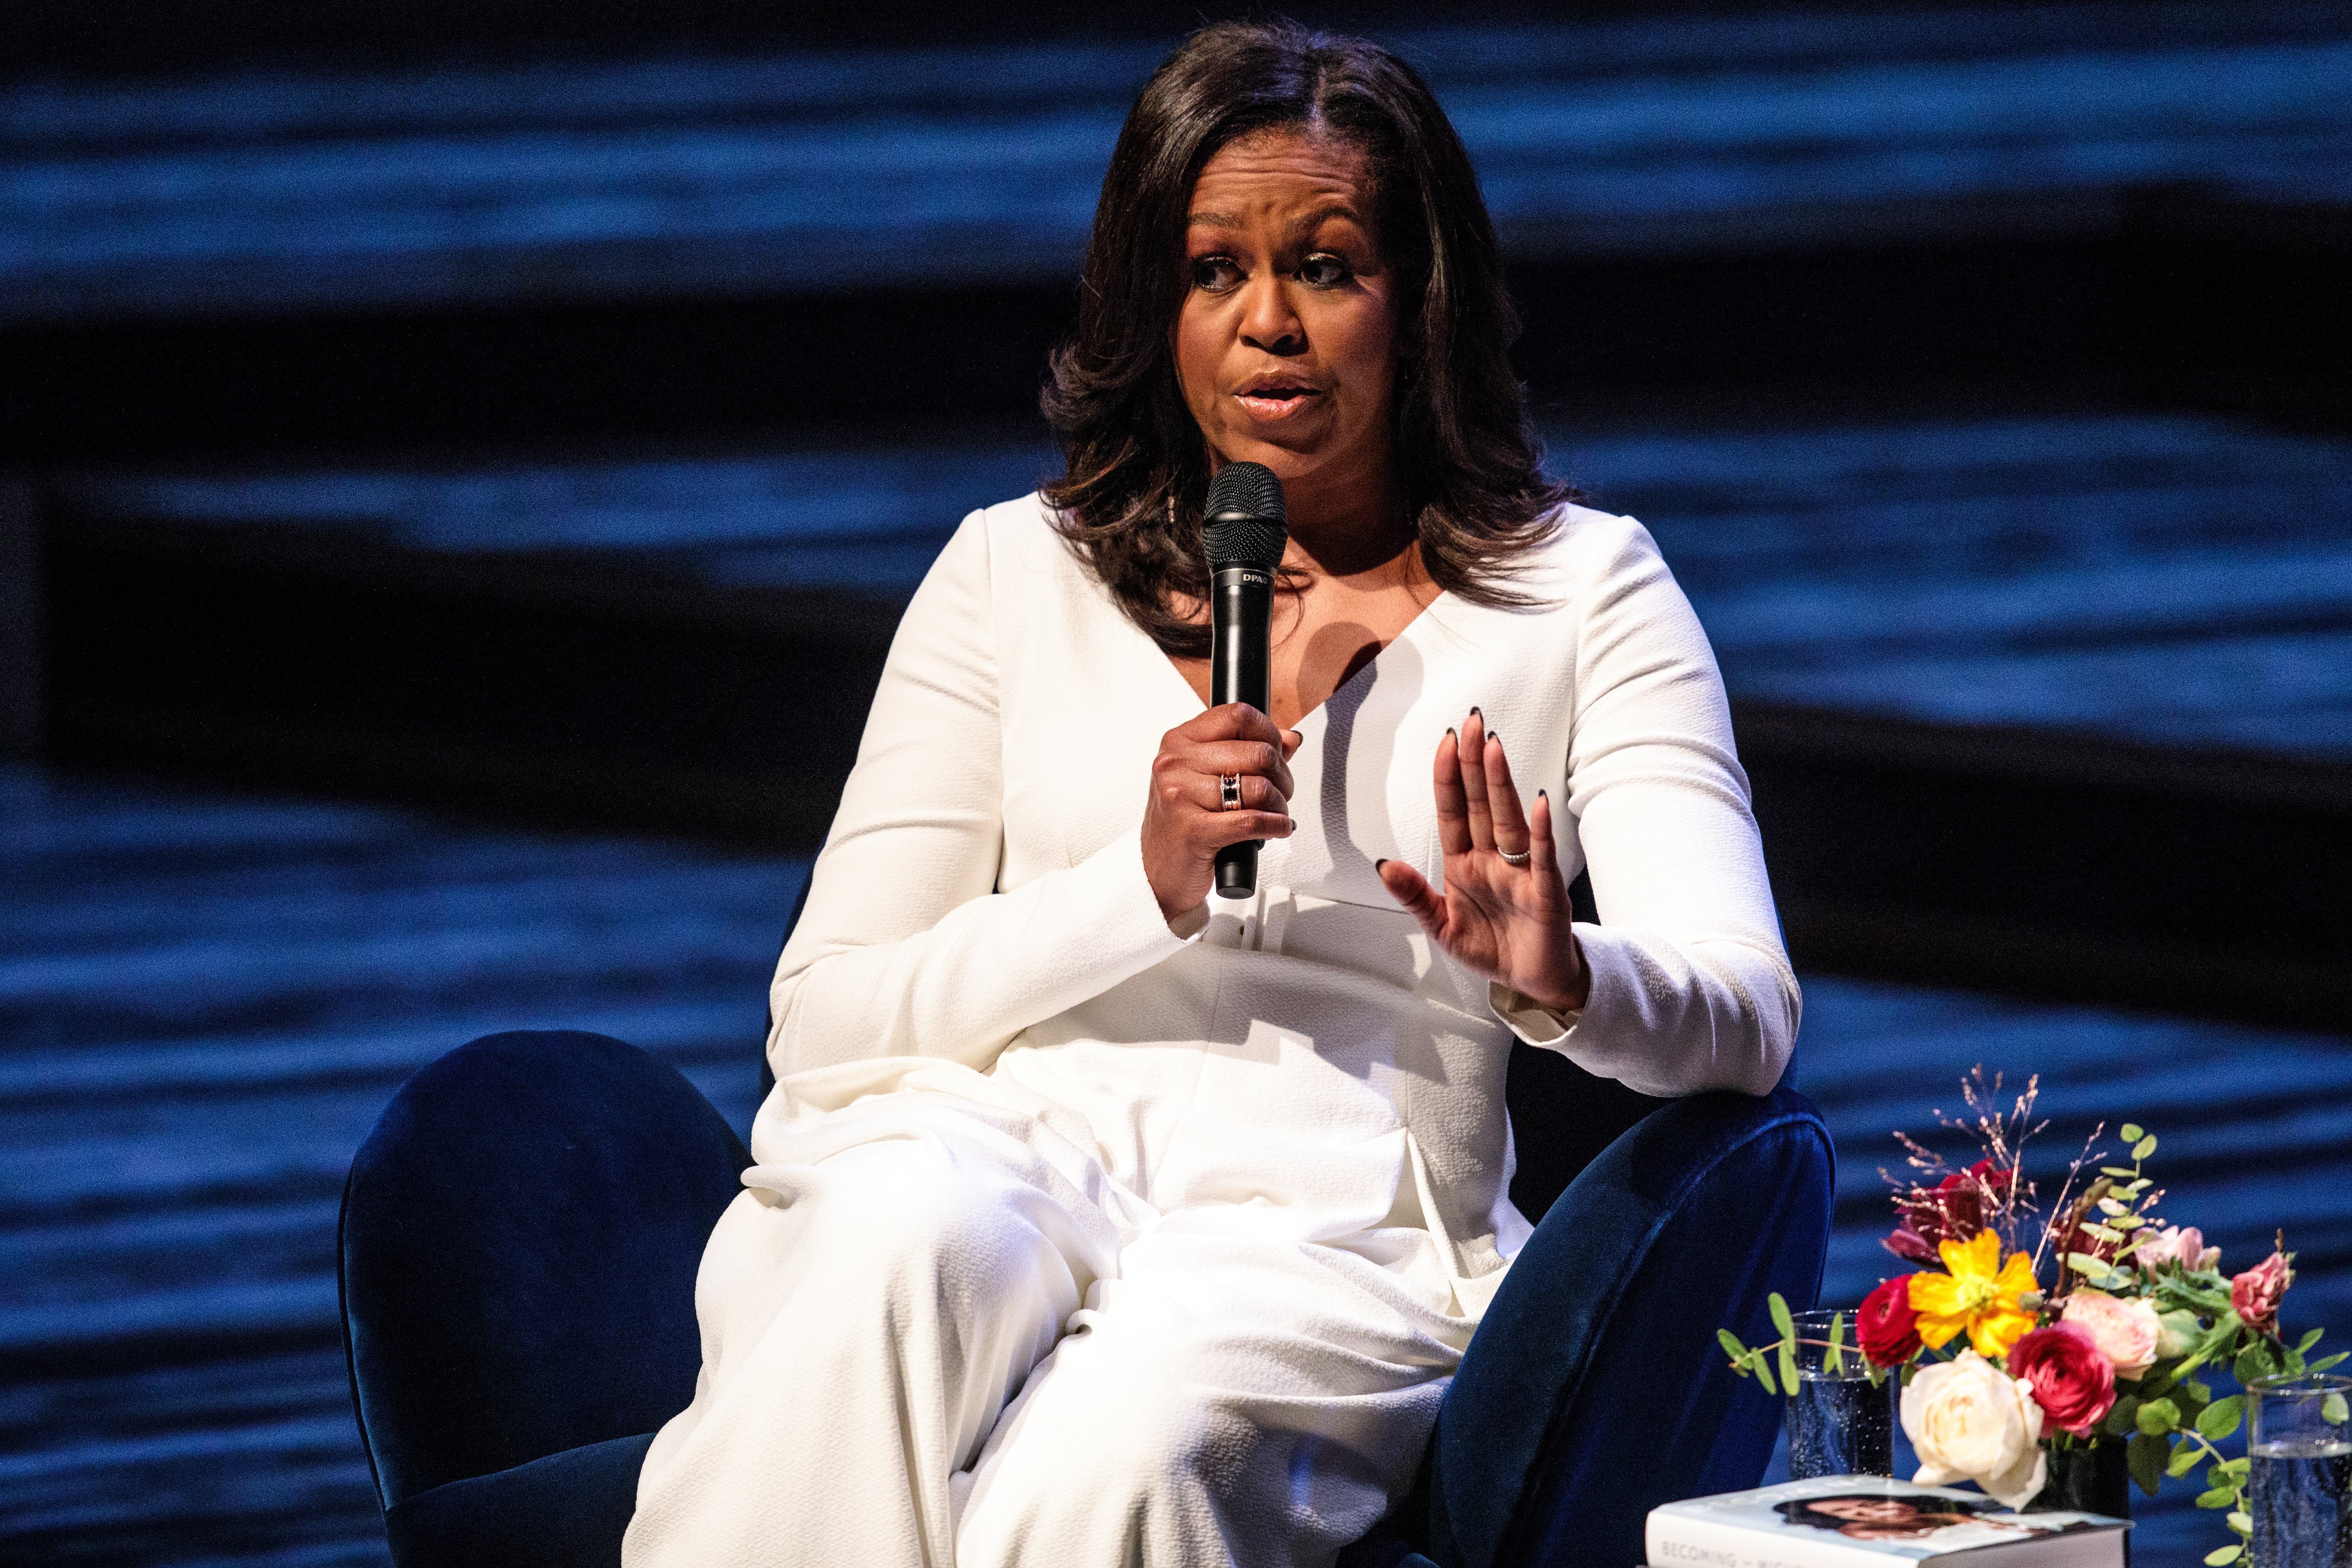 Michelle Obama at The Royal Festival Hall in London, England | Photo: Getty Images